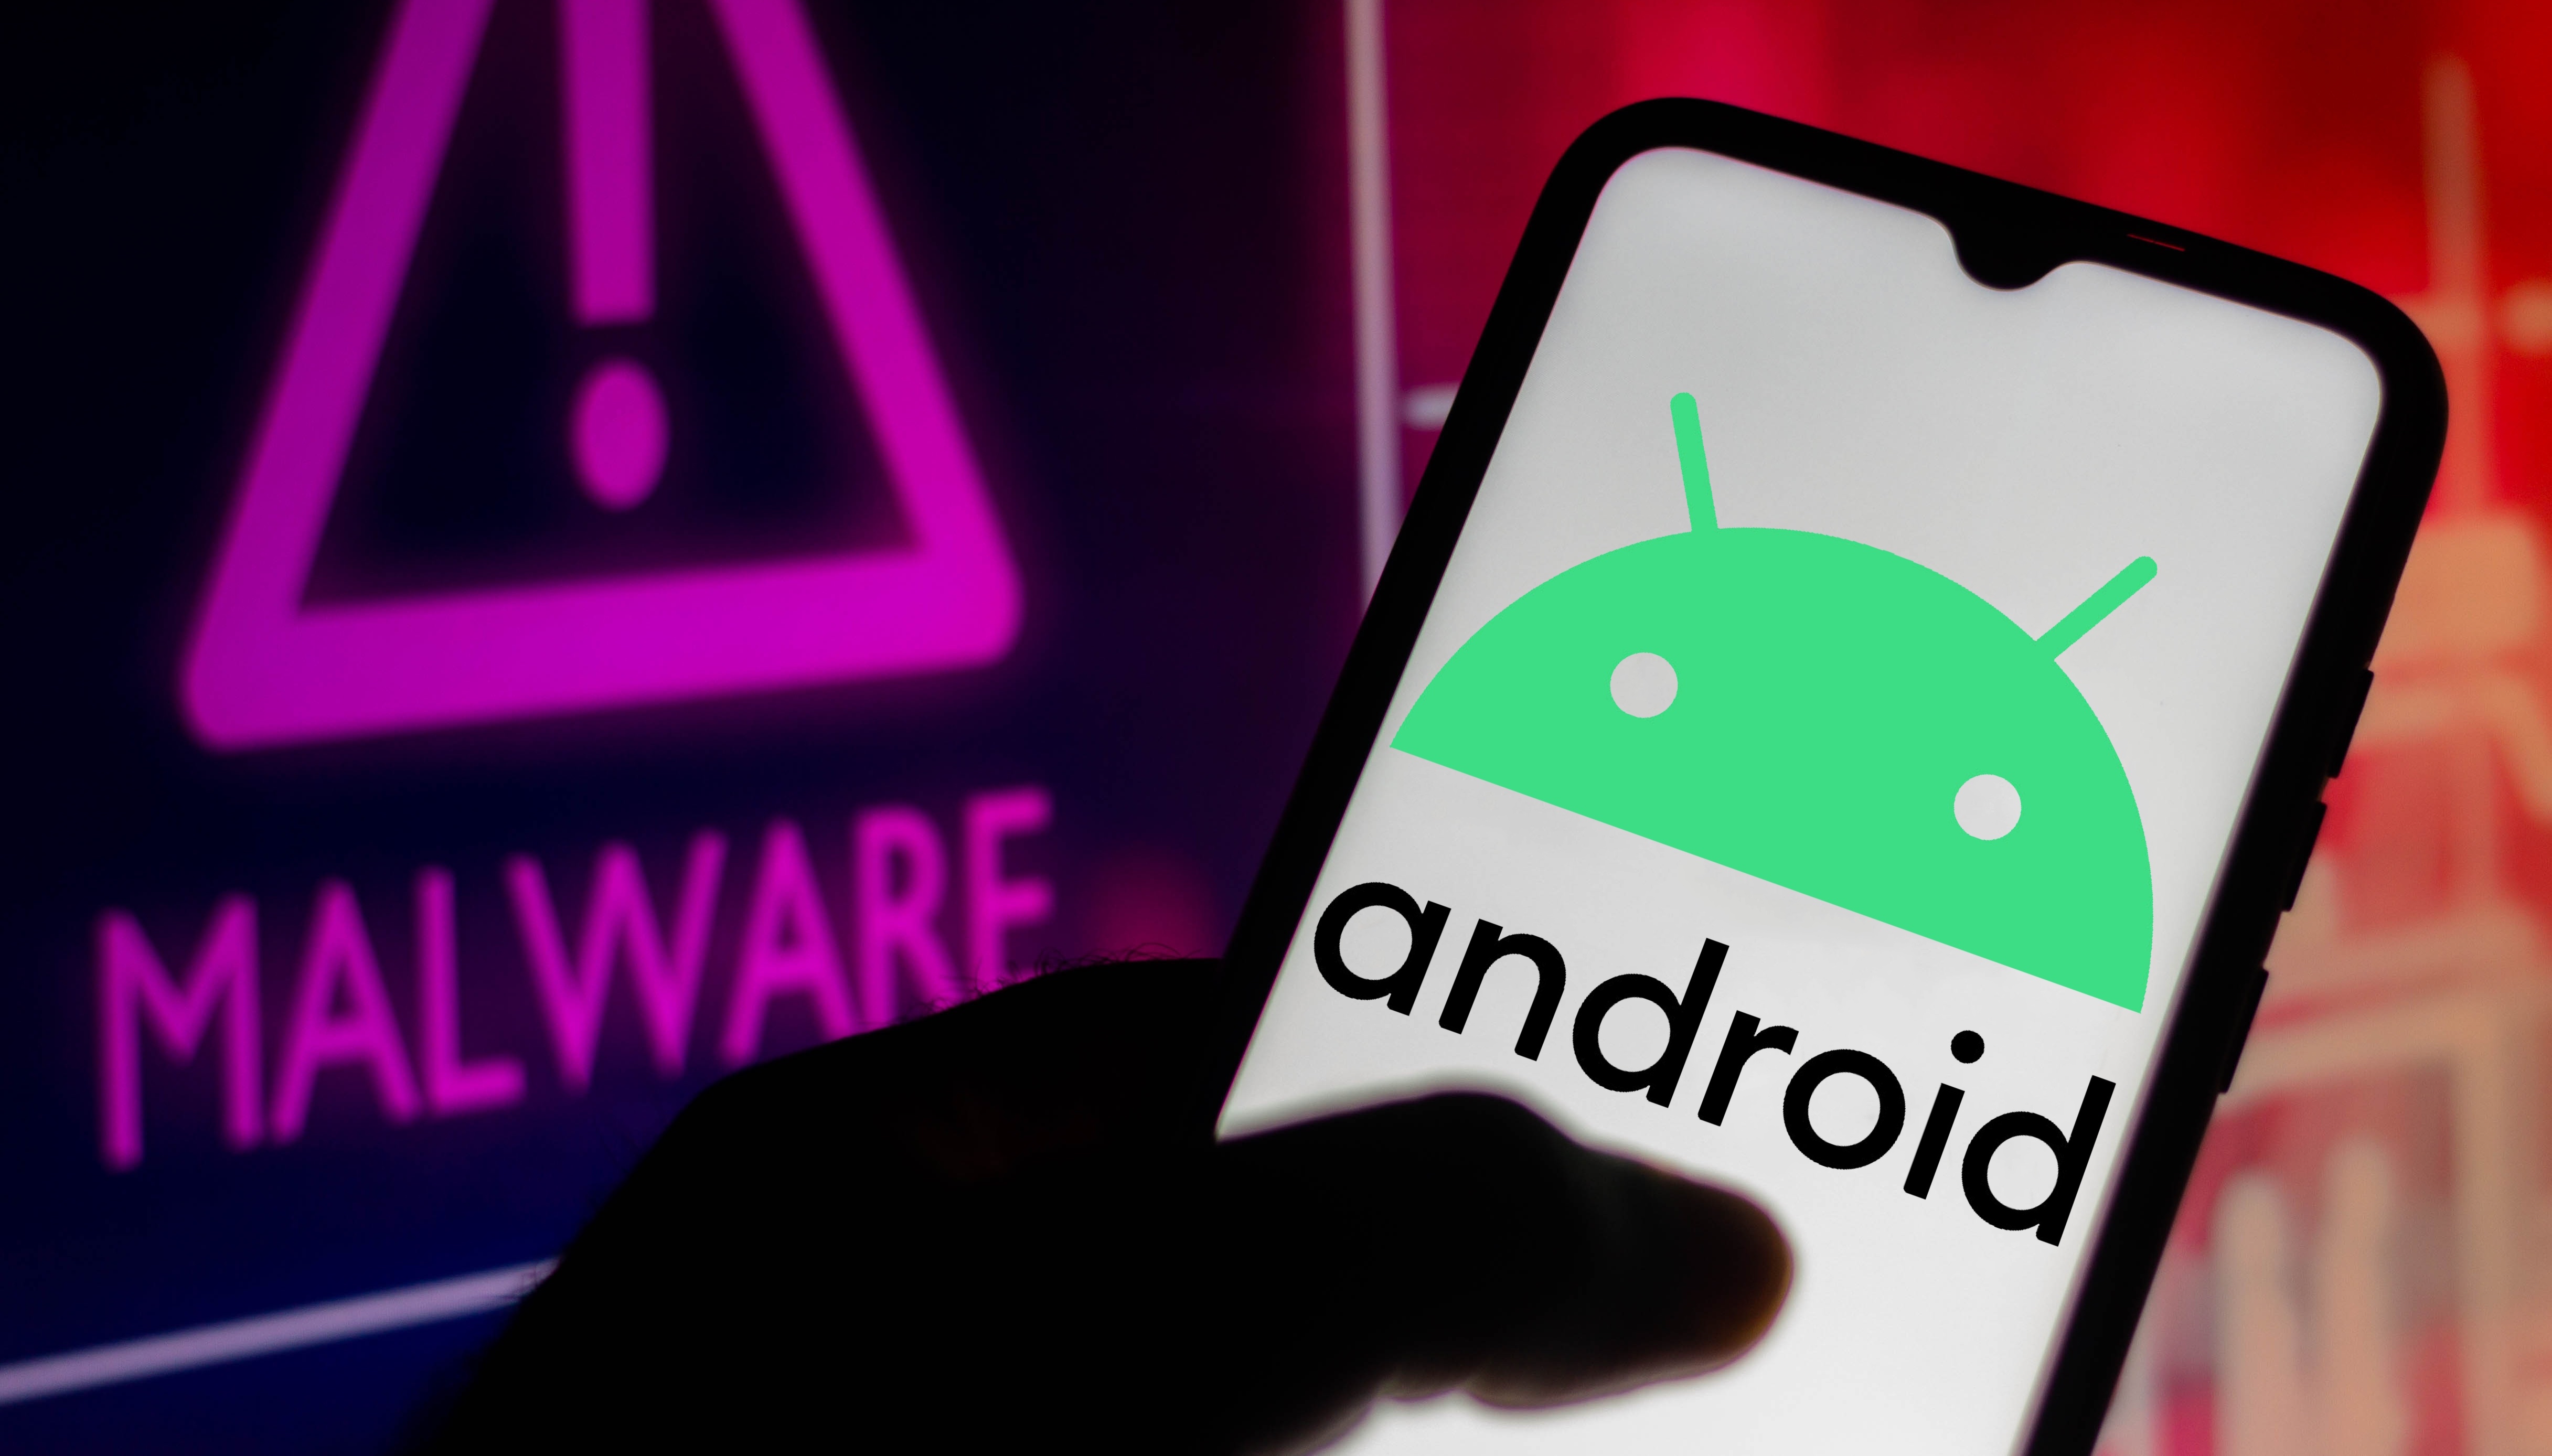 Android malware on the phone